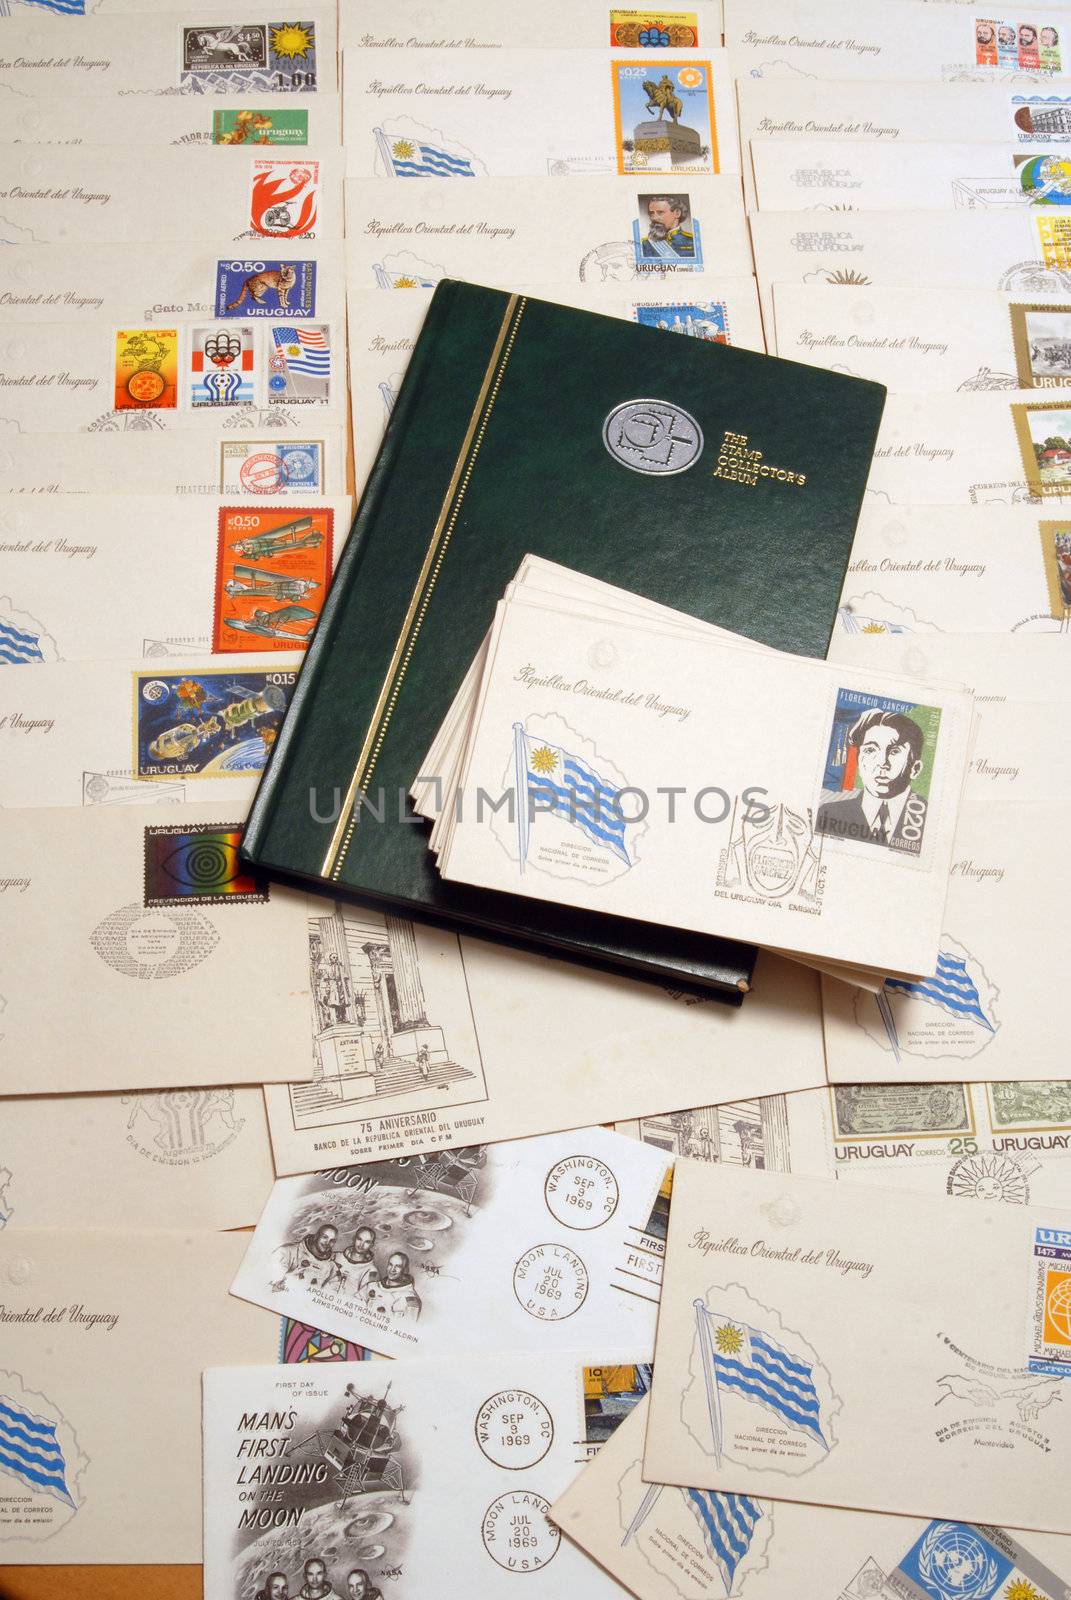 Collection of postcards with stamps from Uruguay and other vintage ones. Hard-cover stamp album over them